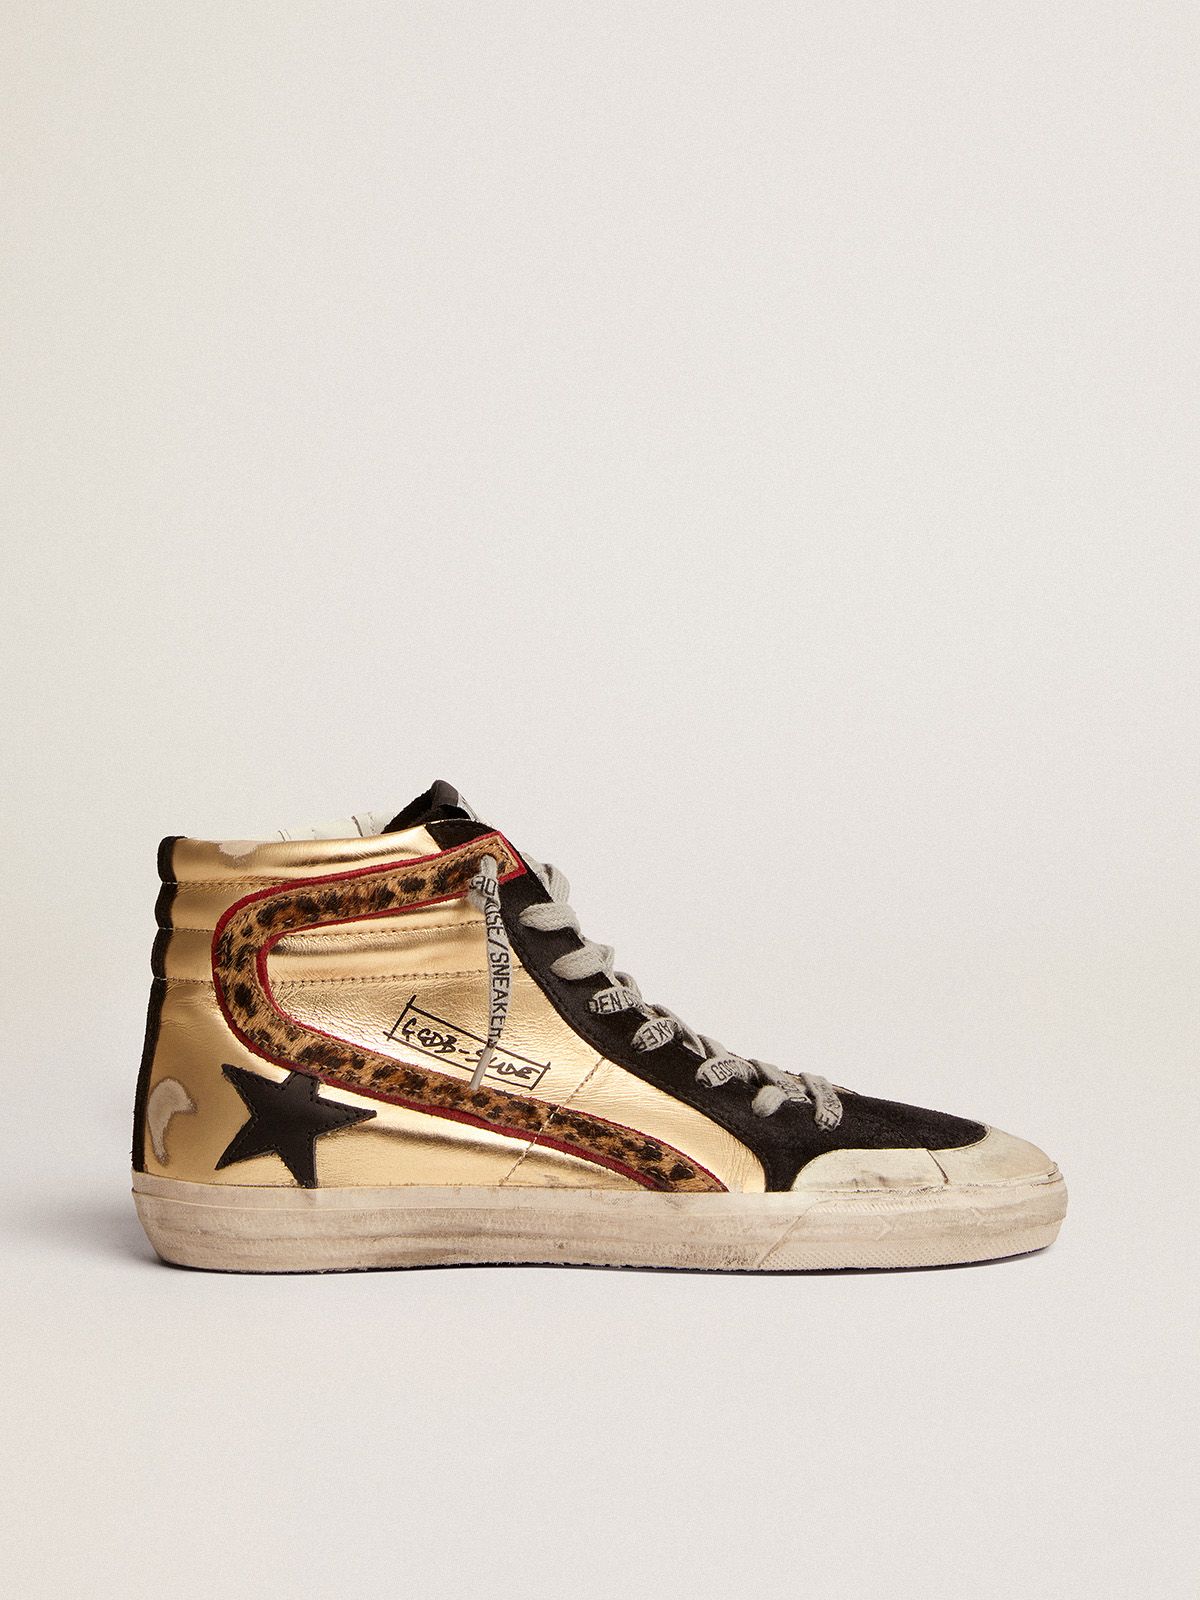 Penstar Slide sneakers in gold leather with black leather star and leopard-print pony skin insert | 